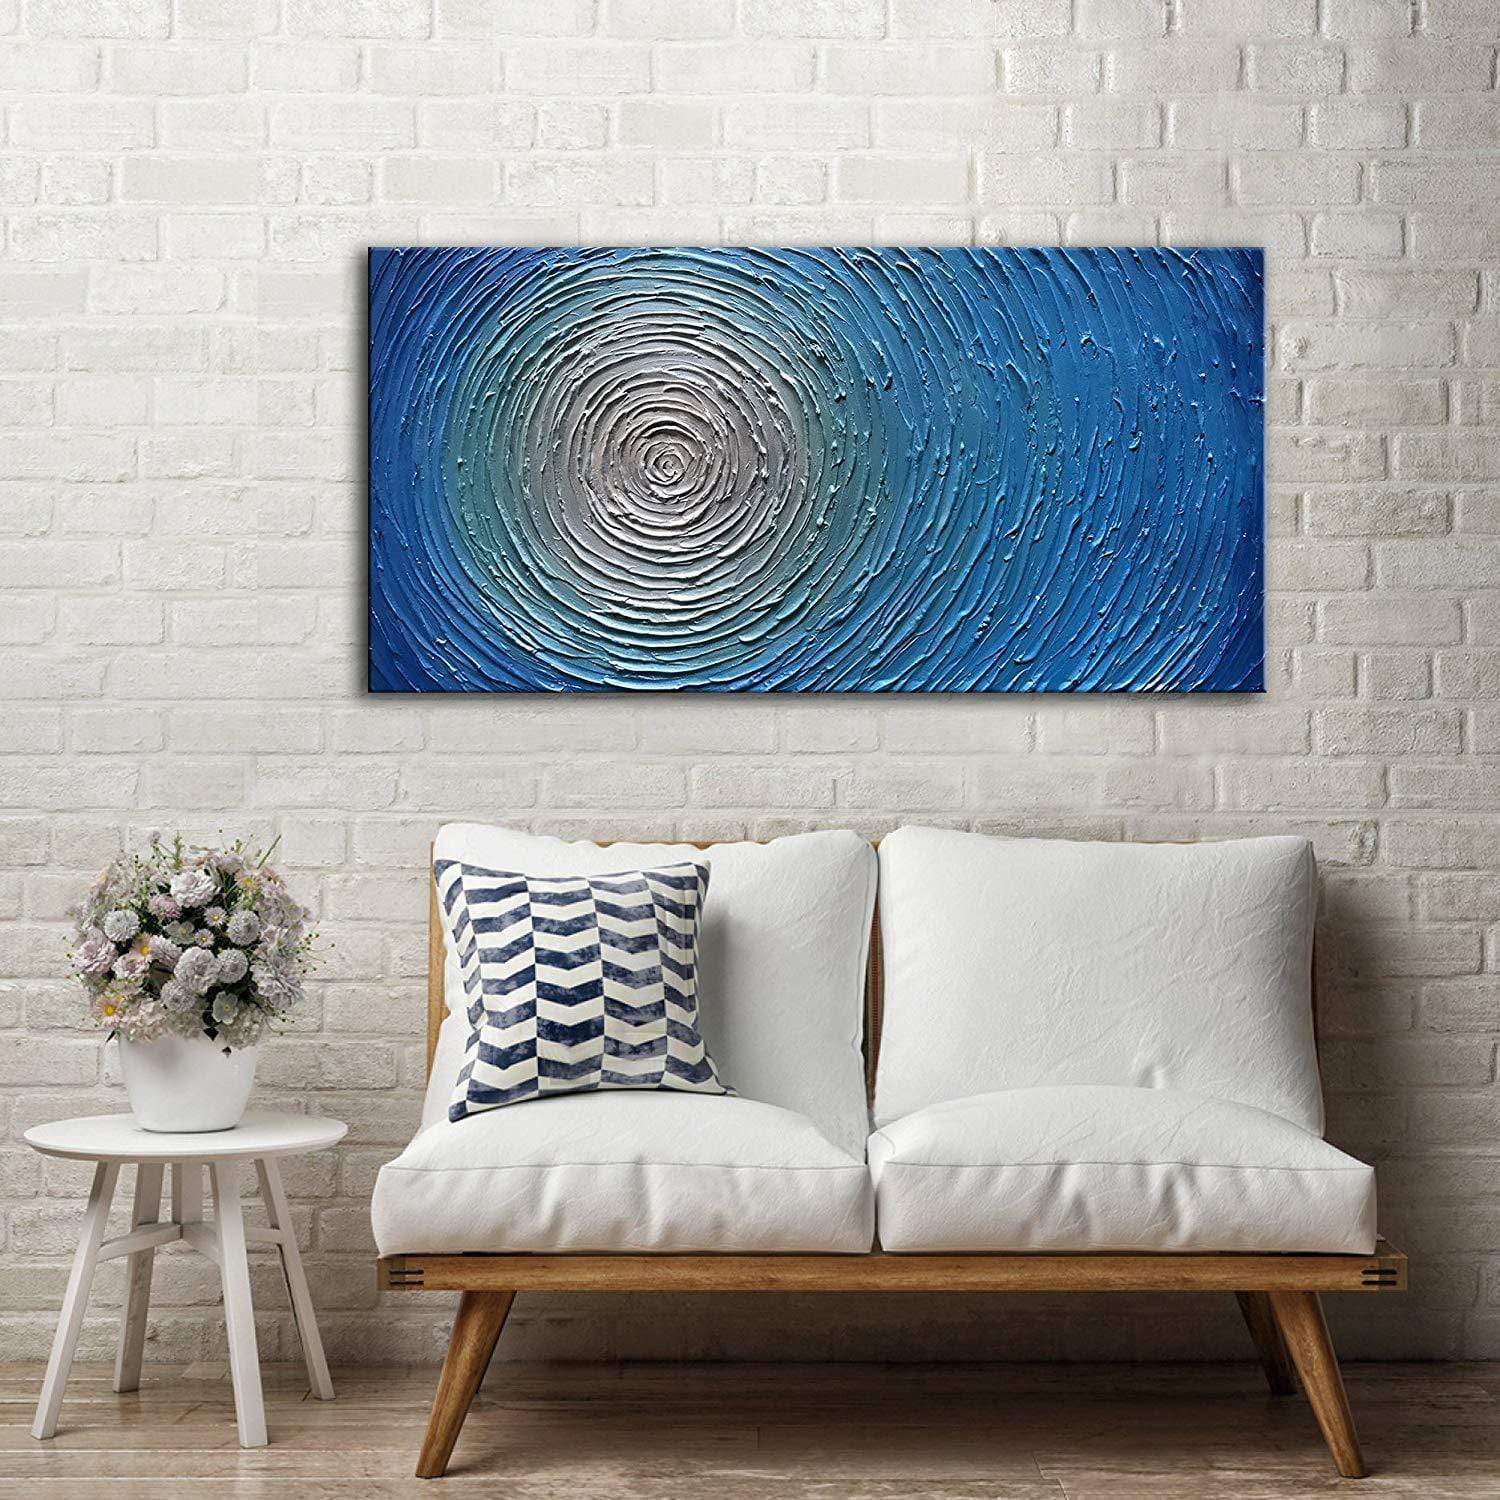 Swirling Maze Oil Painting - Nordic Side - Oil Painting, spo-disabled